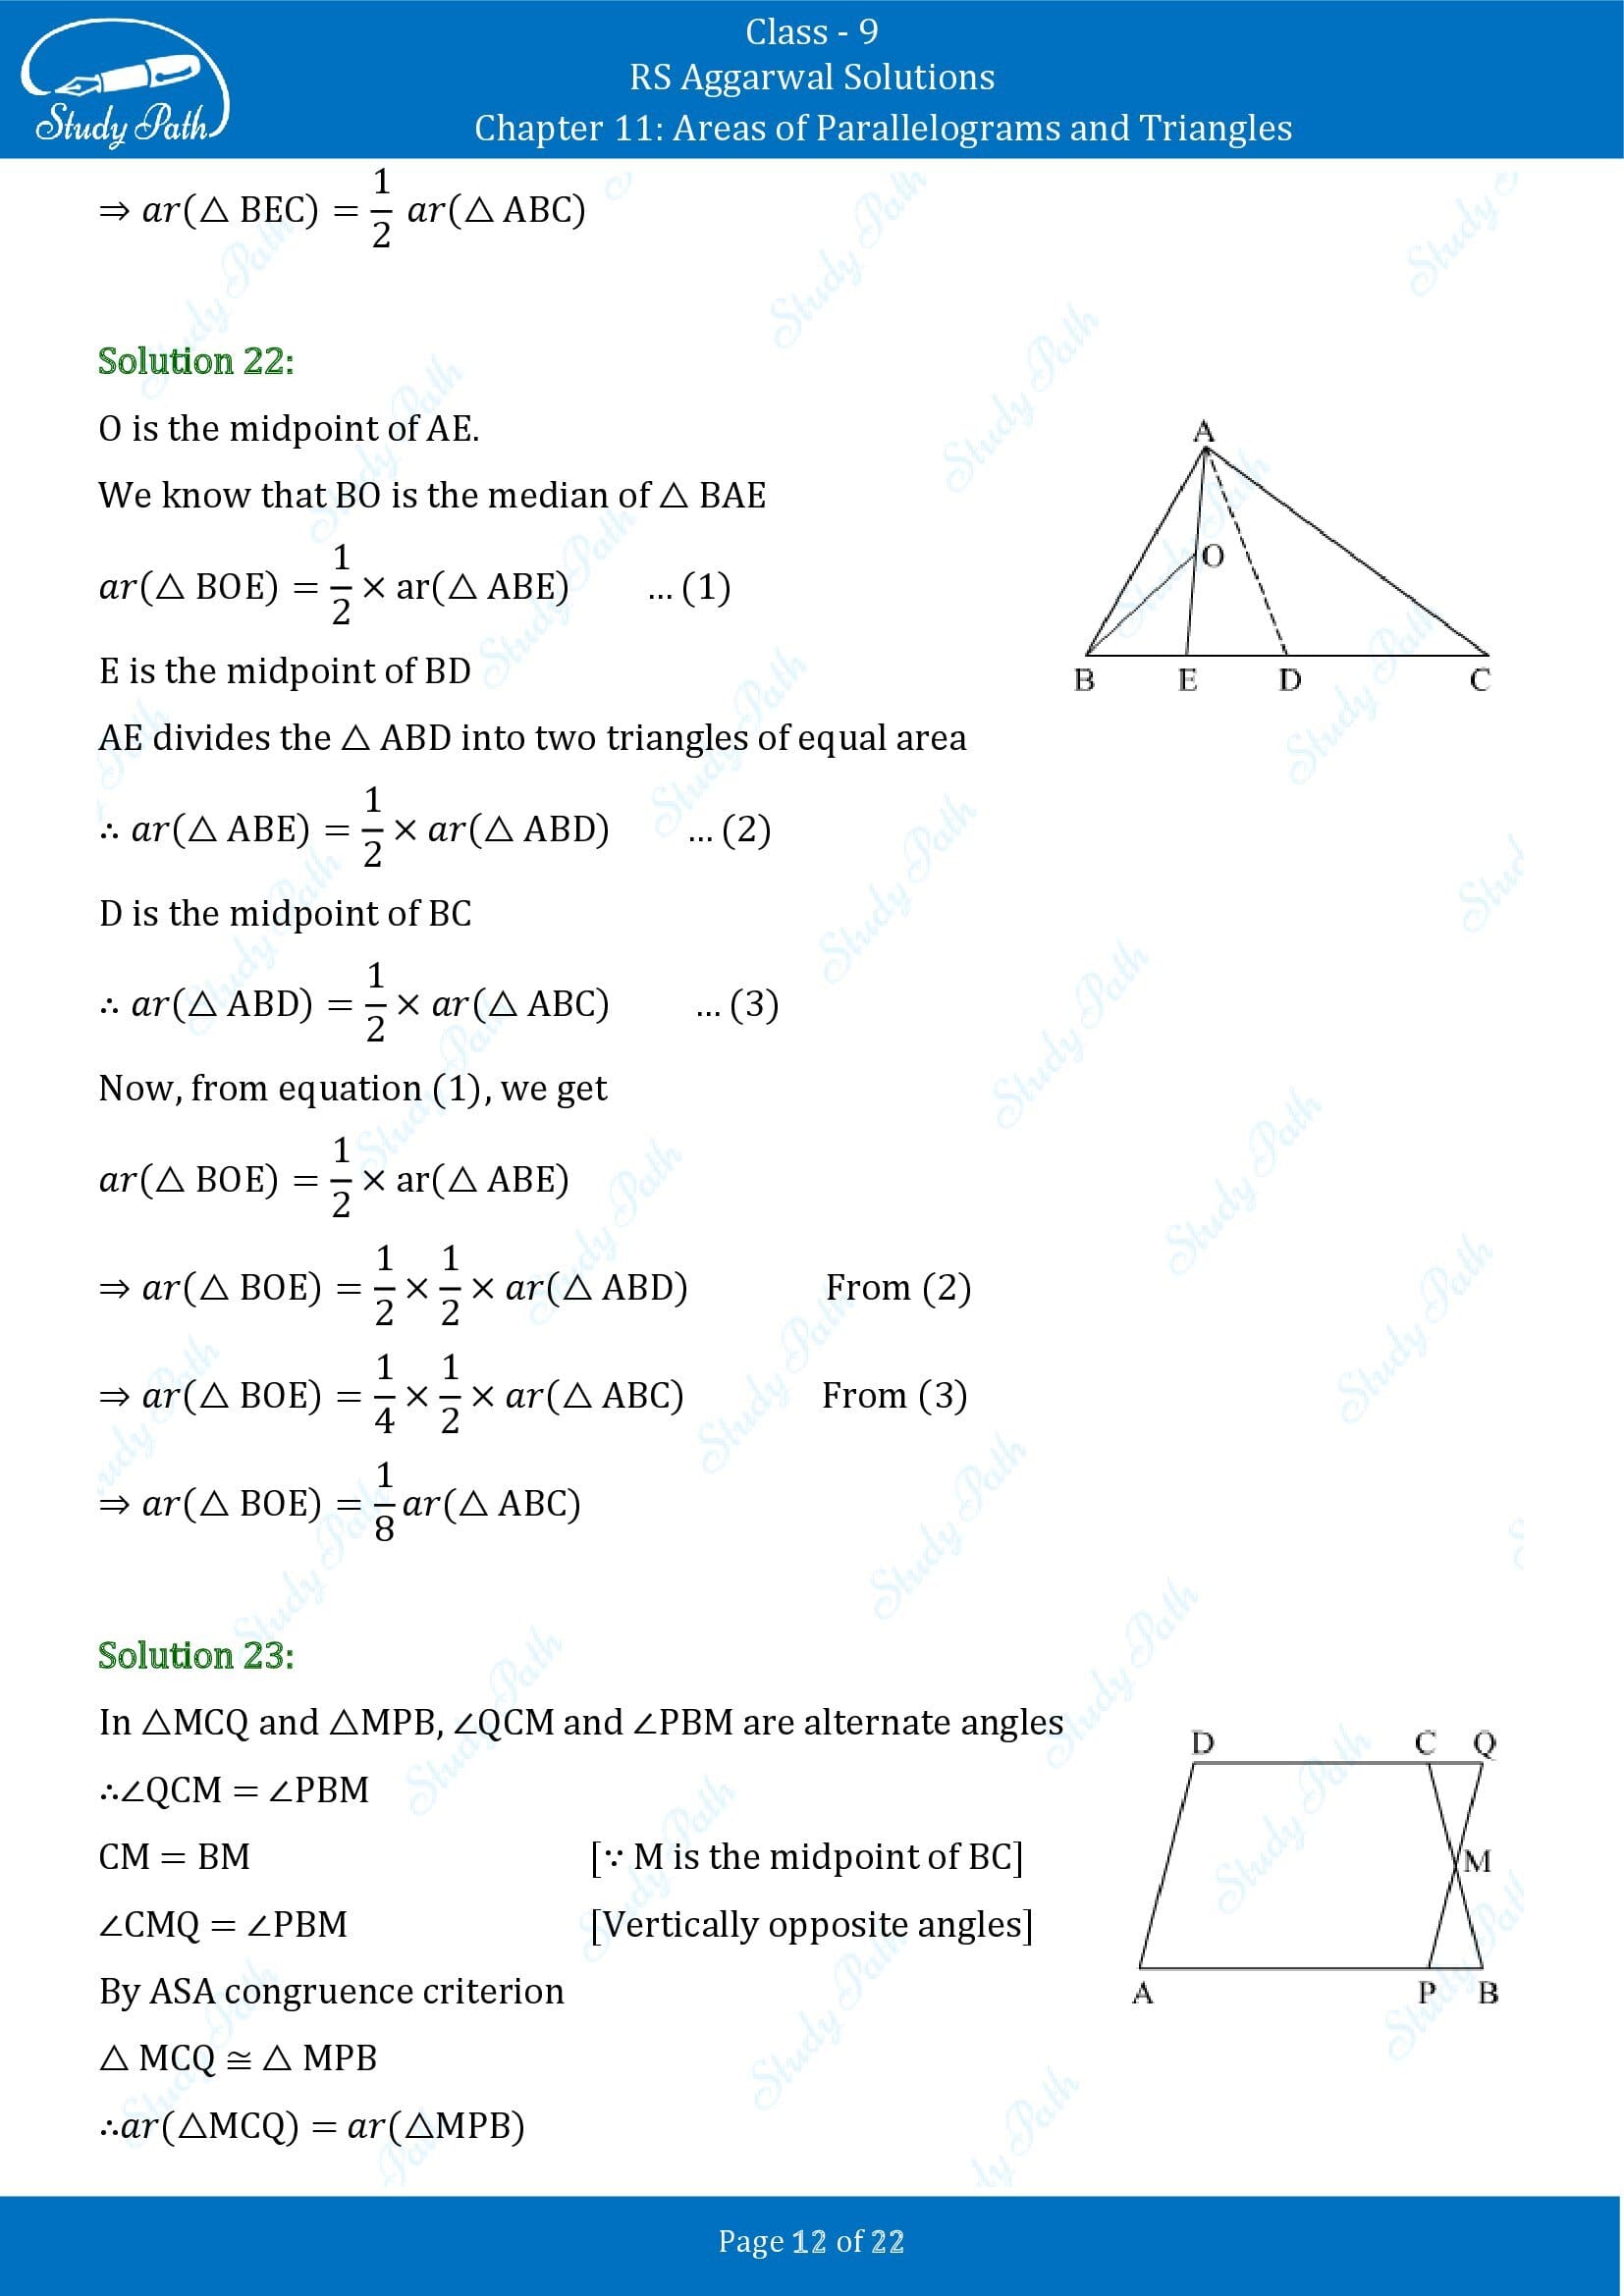 RS Aggarwal Solutions Class 9 Chapter 11 Areas of Parallelograms and Triangles Exercise 11 00012